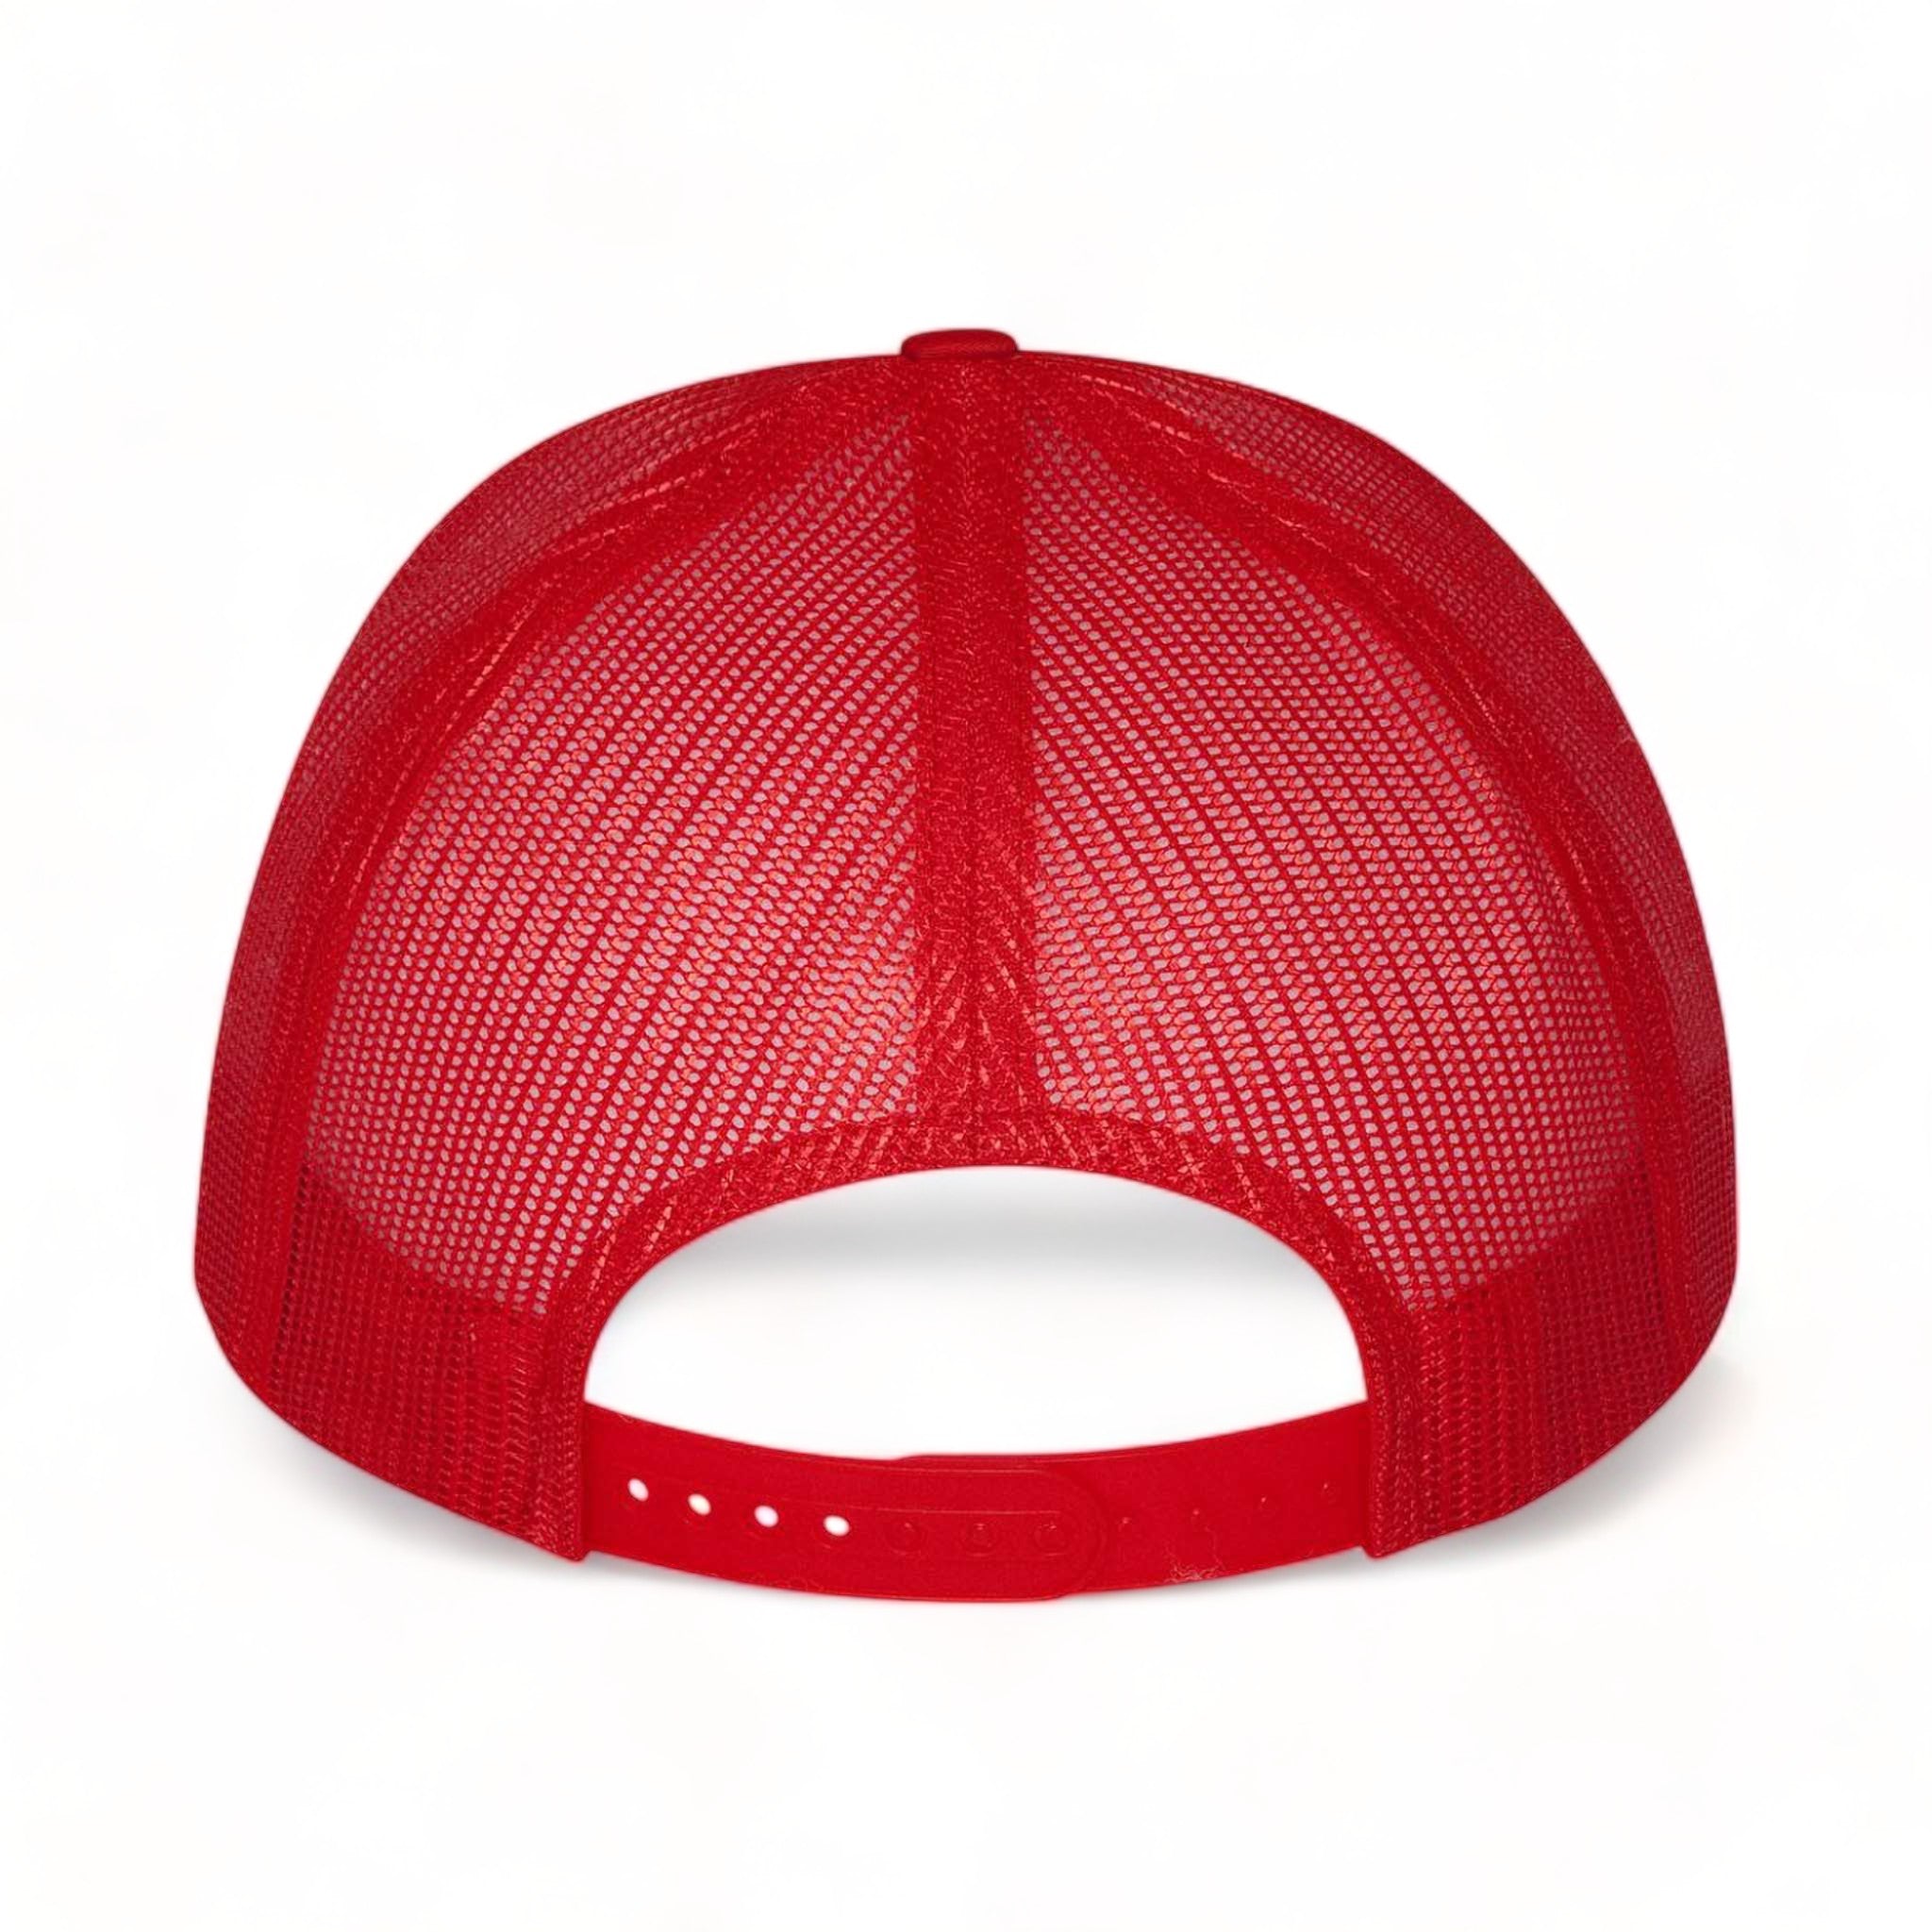 Back view of YP Classics 6006 custom hat in red, white and red